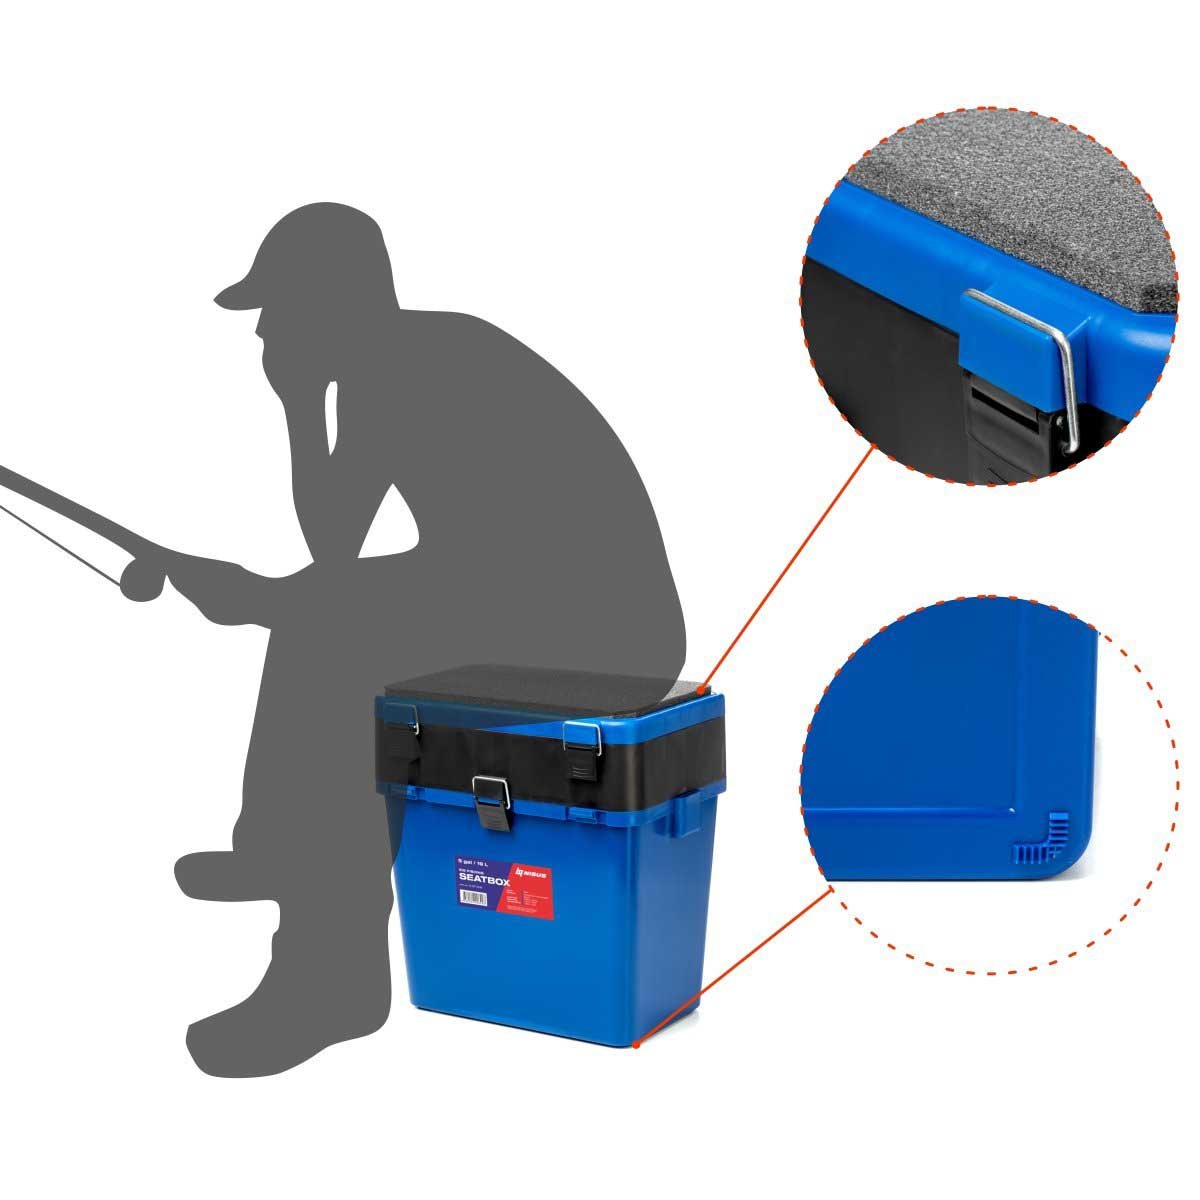 Ice Fishing Bucket Type Box with Seat and Adjustable Shoulder Strap is equipped with a polyurethane seat and anti-slip wards